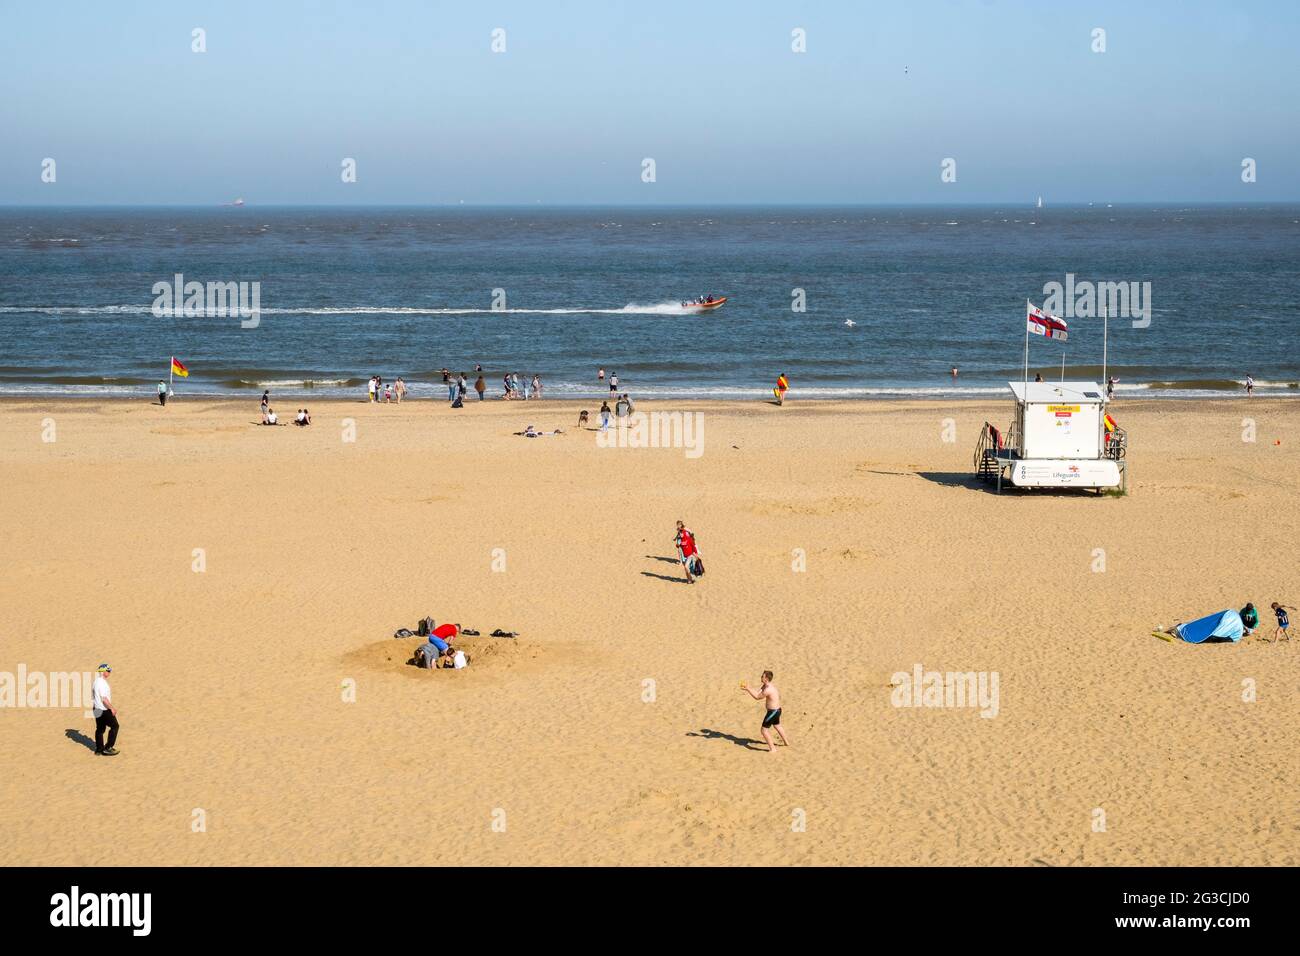 Spring bank holiday  at the seaside on Lowestoft beach, Suffolk. Stock Photo